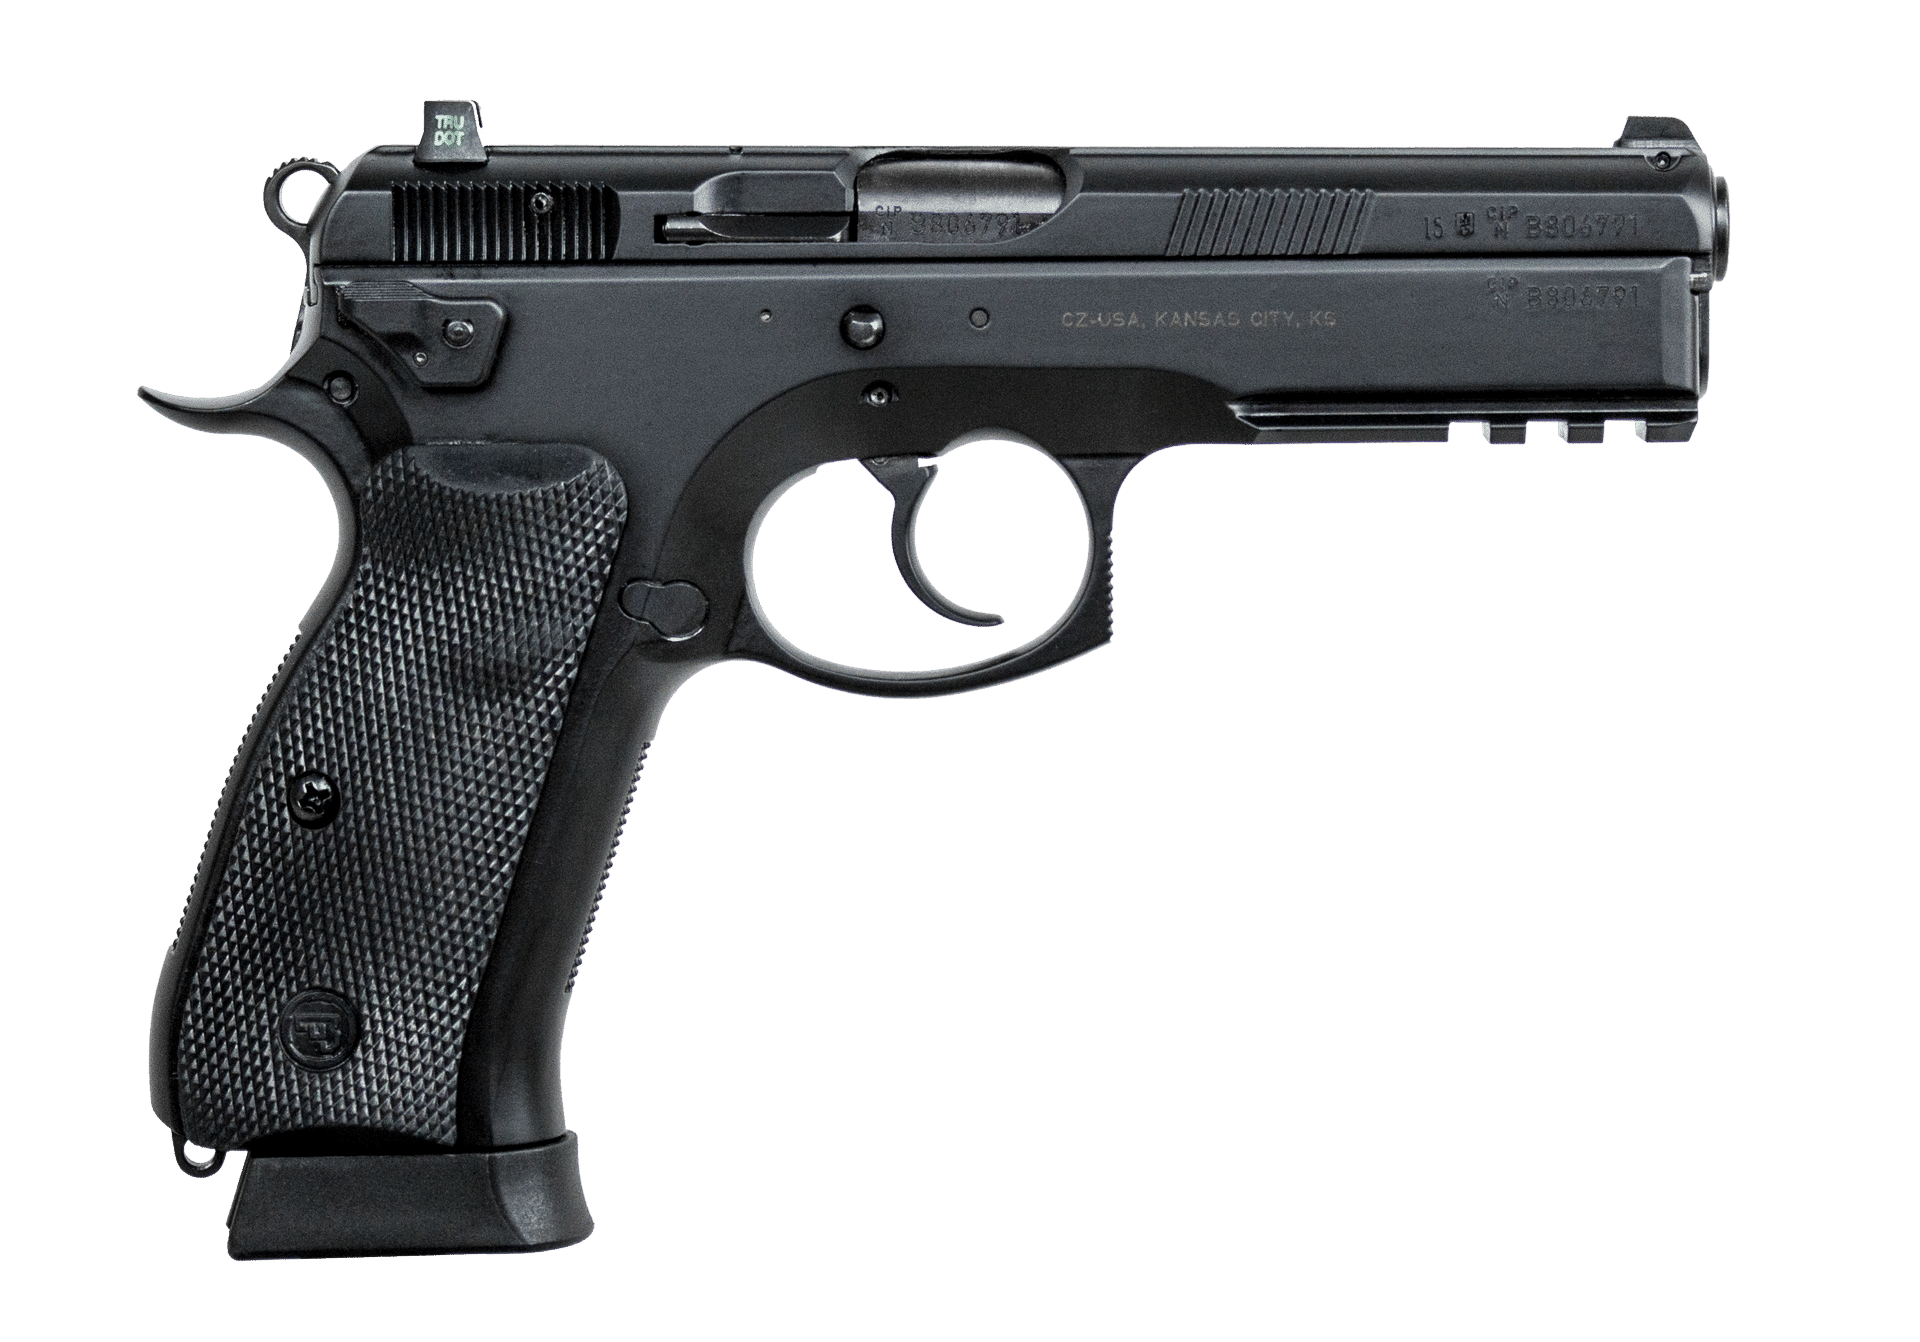 image of CZ 75 SP-01 Tactical